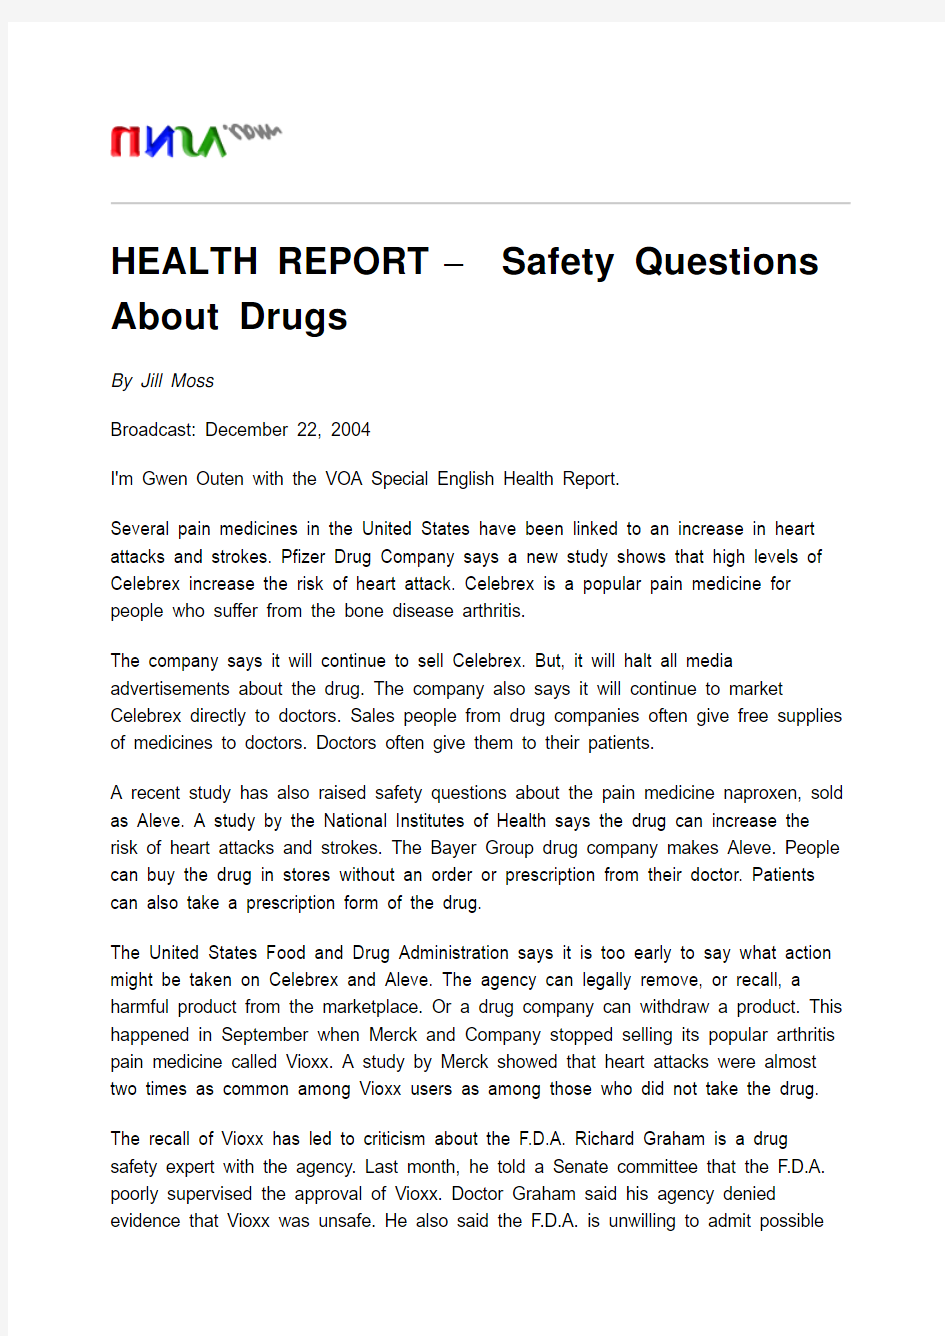 HEALTH REPORT – Safety Questions About Drugs